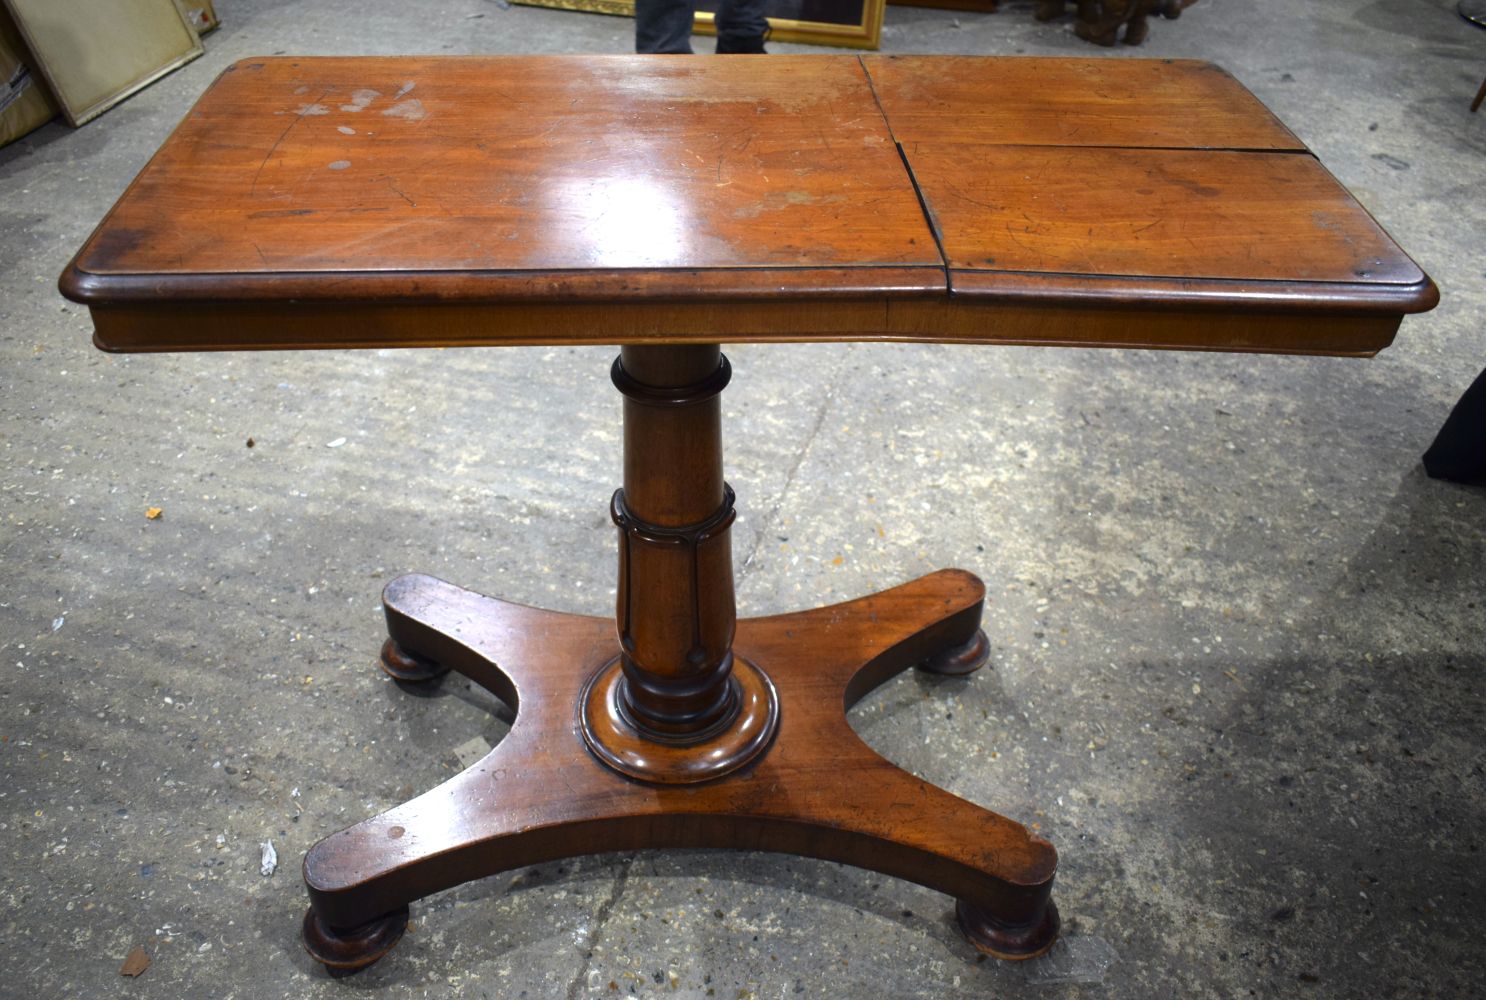 A small Victorian Pedestal reading table with top opening writing slopes 73 x 91 cm. - Image 8 of 8